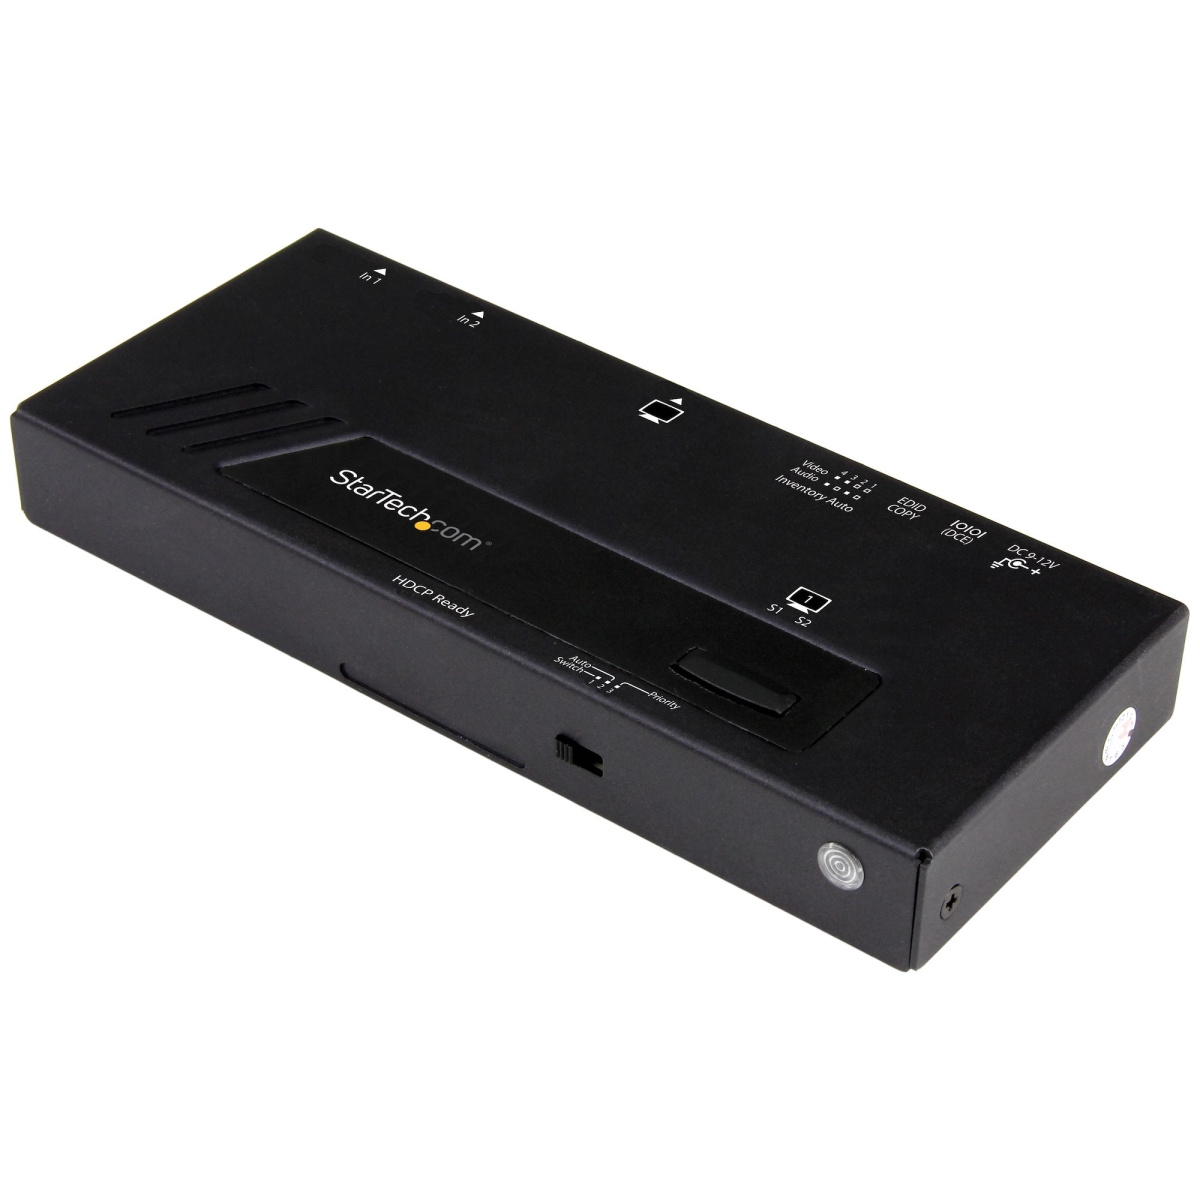 Picture of Startech ST-VS221HD4KA 2-Port HDMI Automatic Video Switch - 4K with Fast Switching